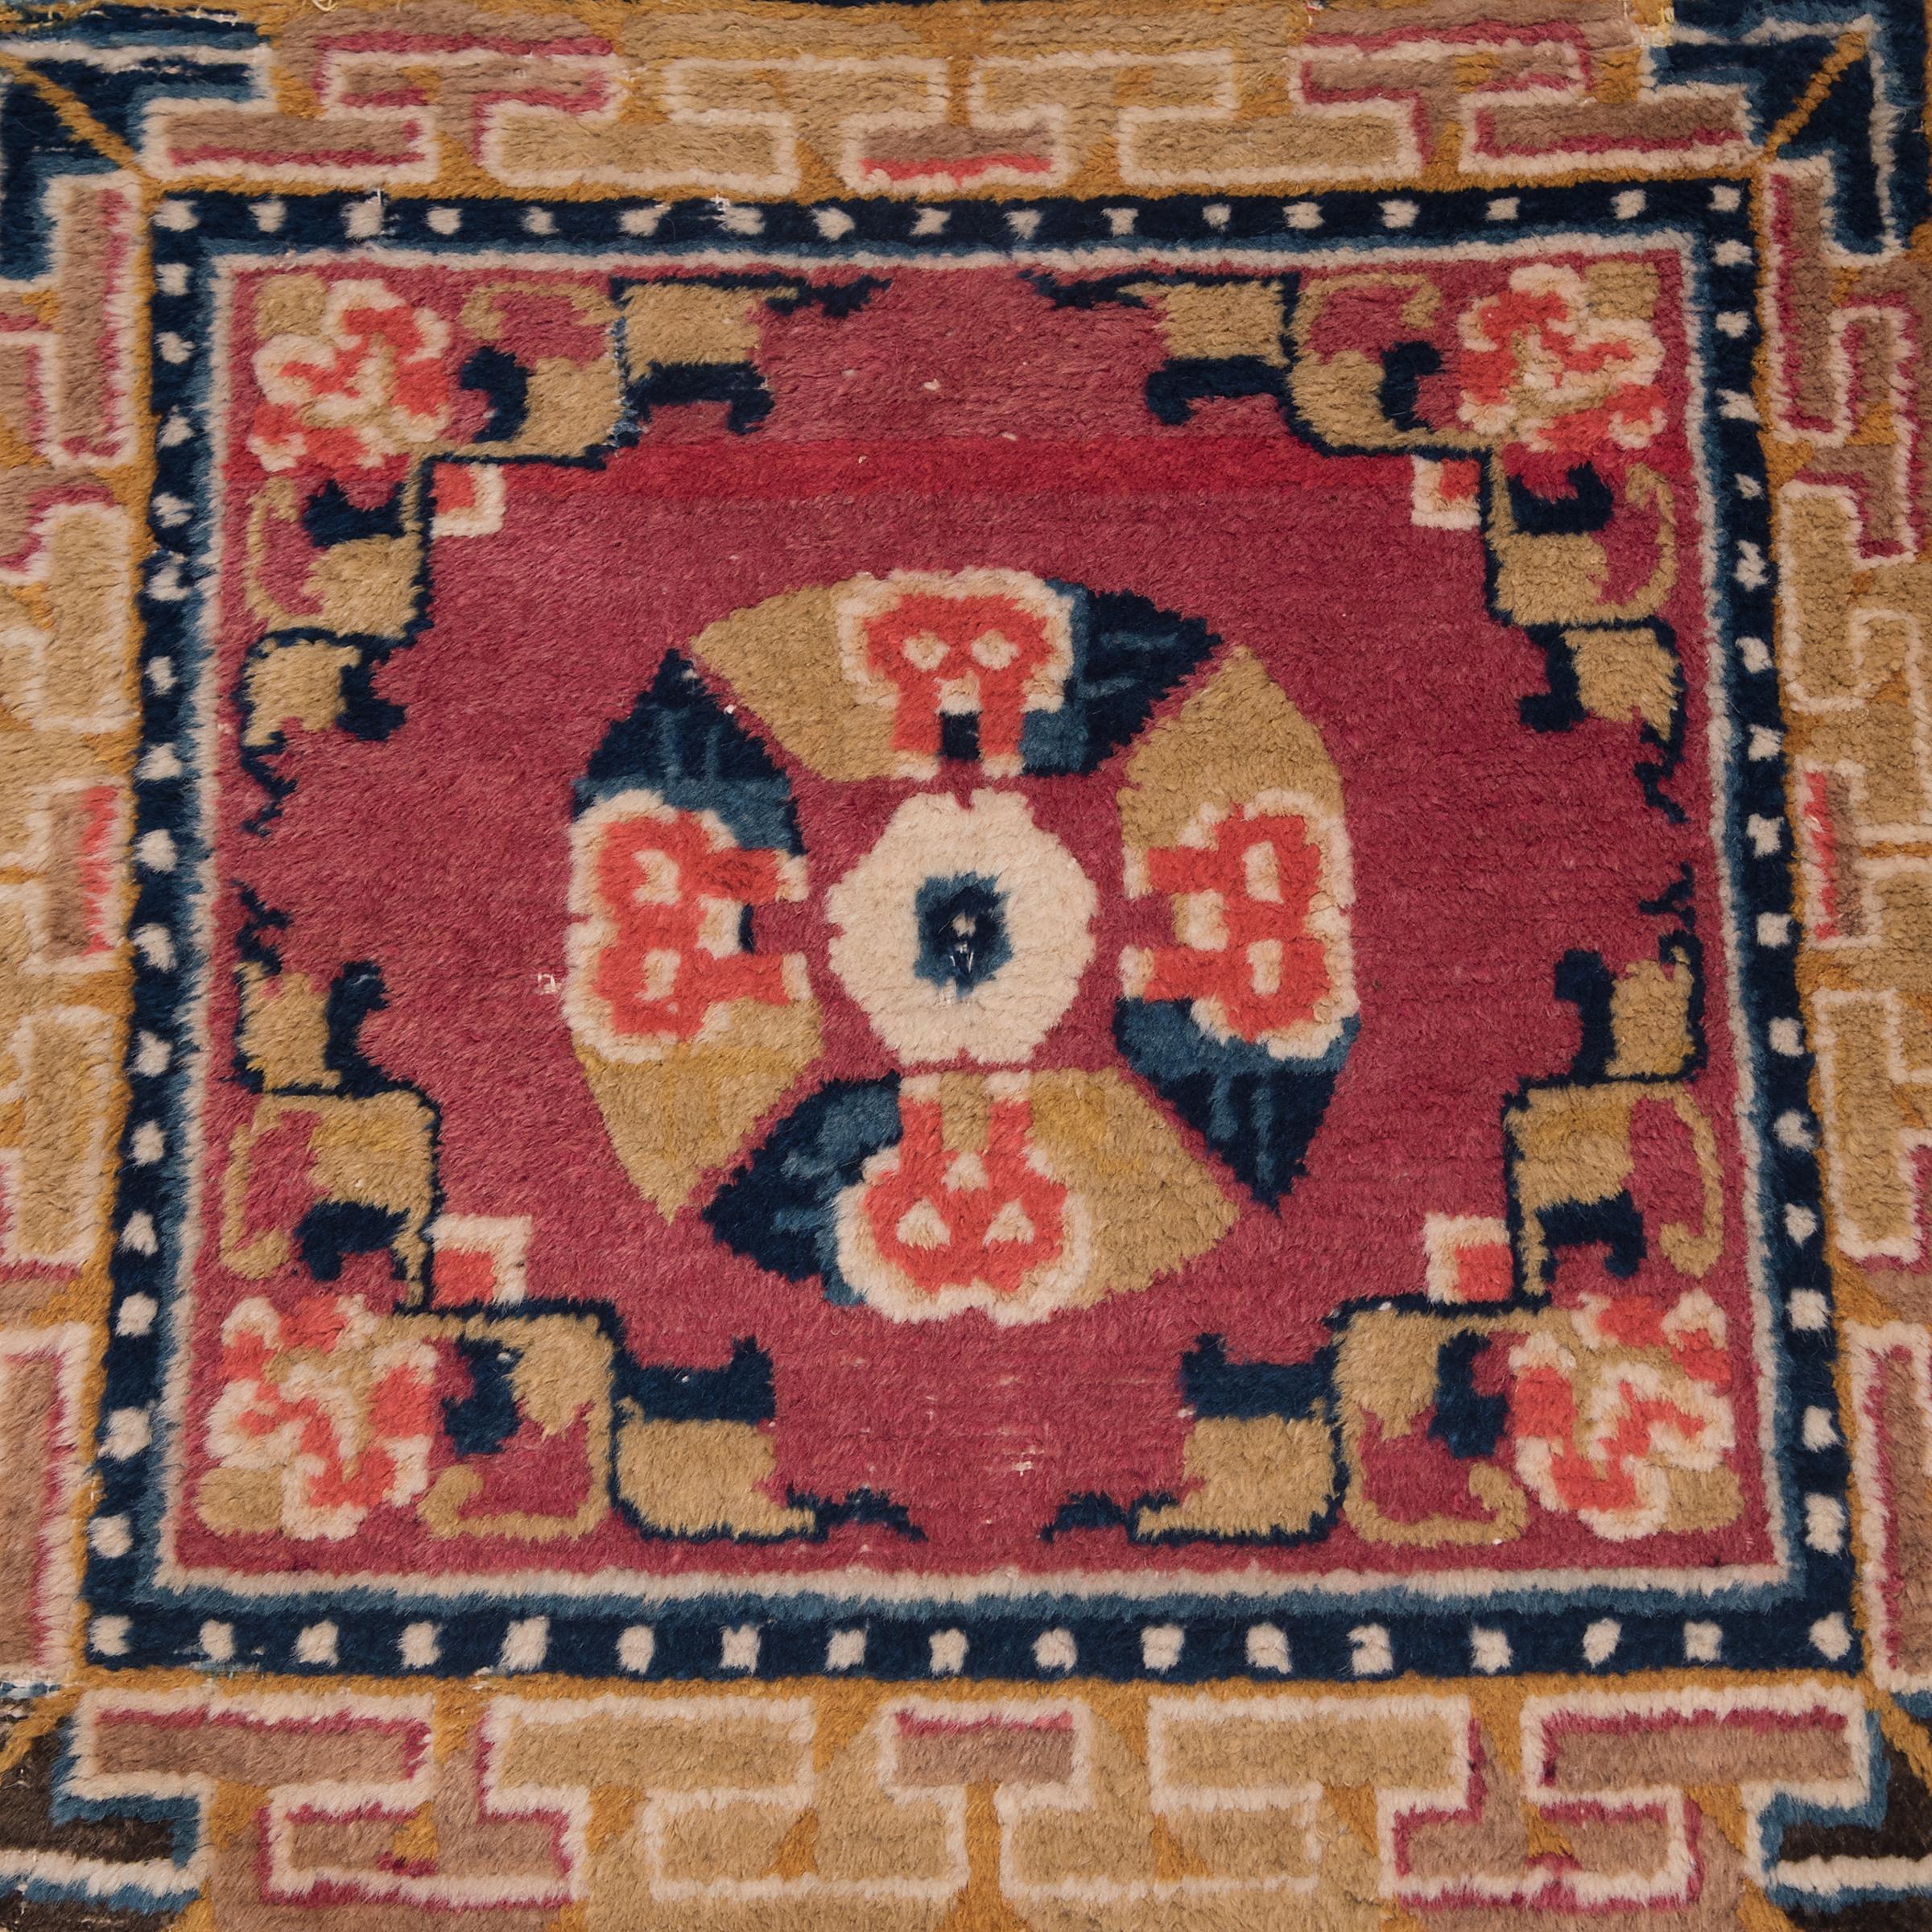 Beautifully knotted of vegetable-dyed wool, carpets by the nomadic peoples of Tibet, Mongolia, and northern China decorated every aspect of life with bright color and rich symbolism. Unlike those of the Chinese weaving tradition, such carpets were